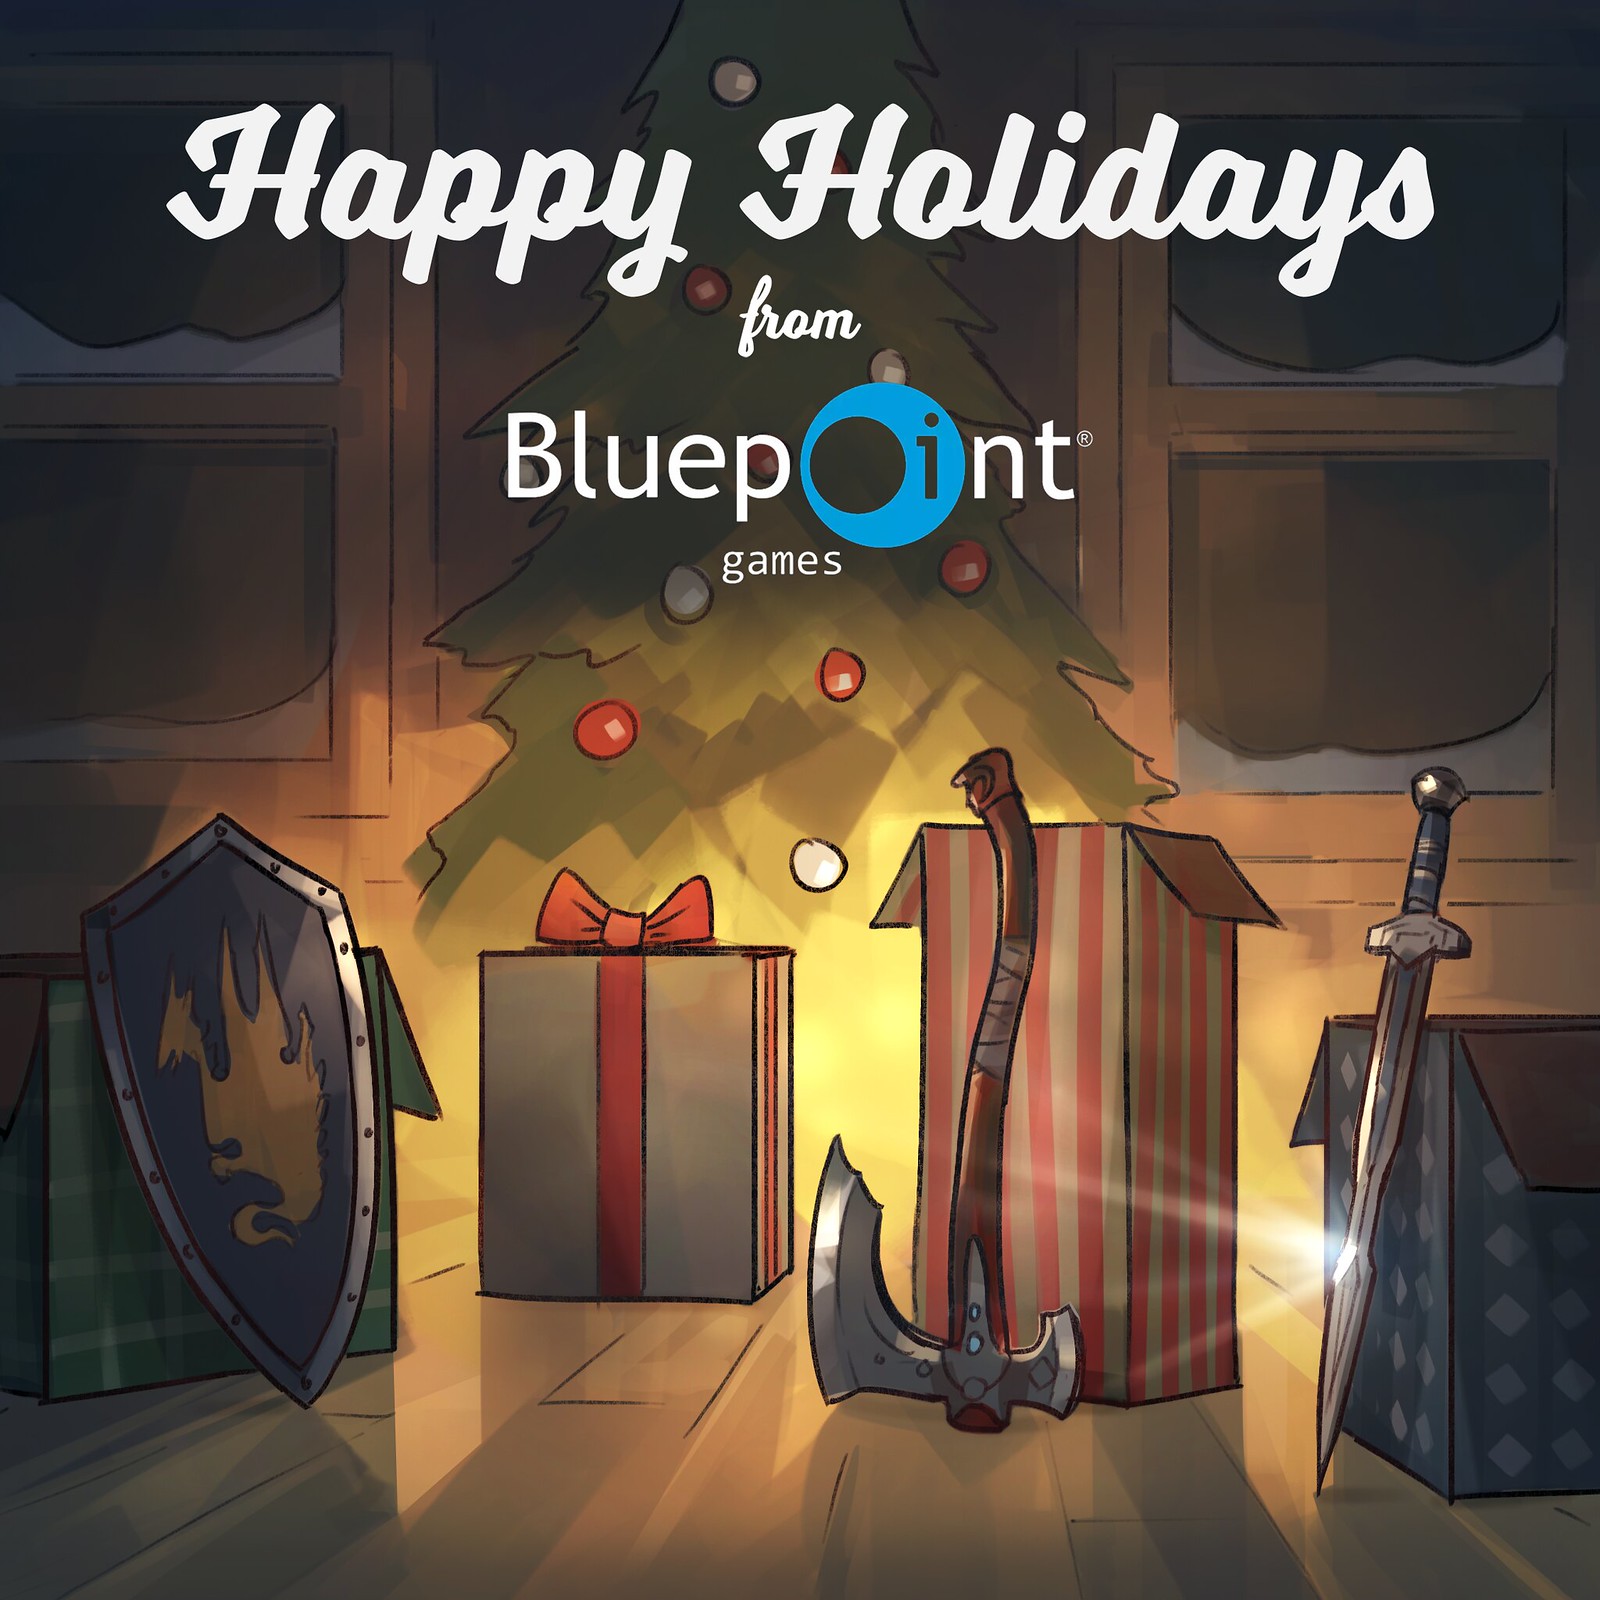 bluepoint games holiday card 2022